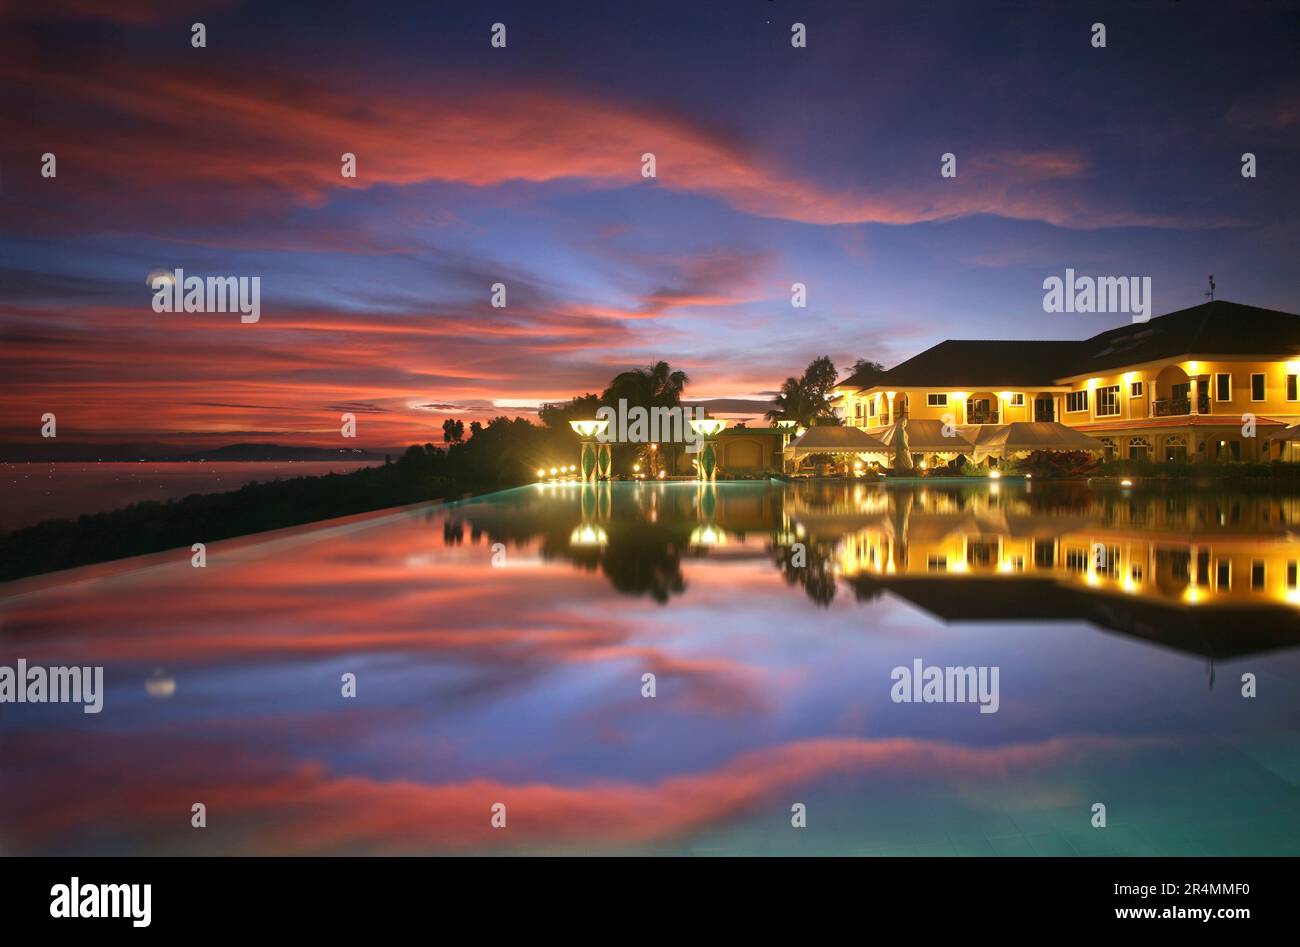 Infinity pool beneath a blue and orange sky beside a hotel resort, lit up in the evening in the Philippines. Stock Photo